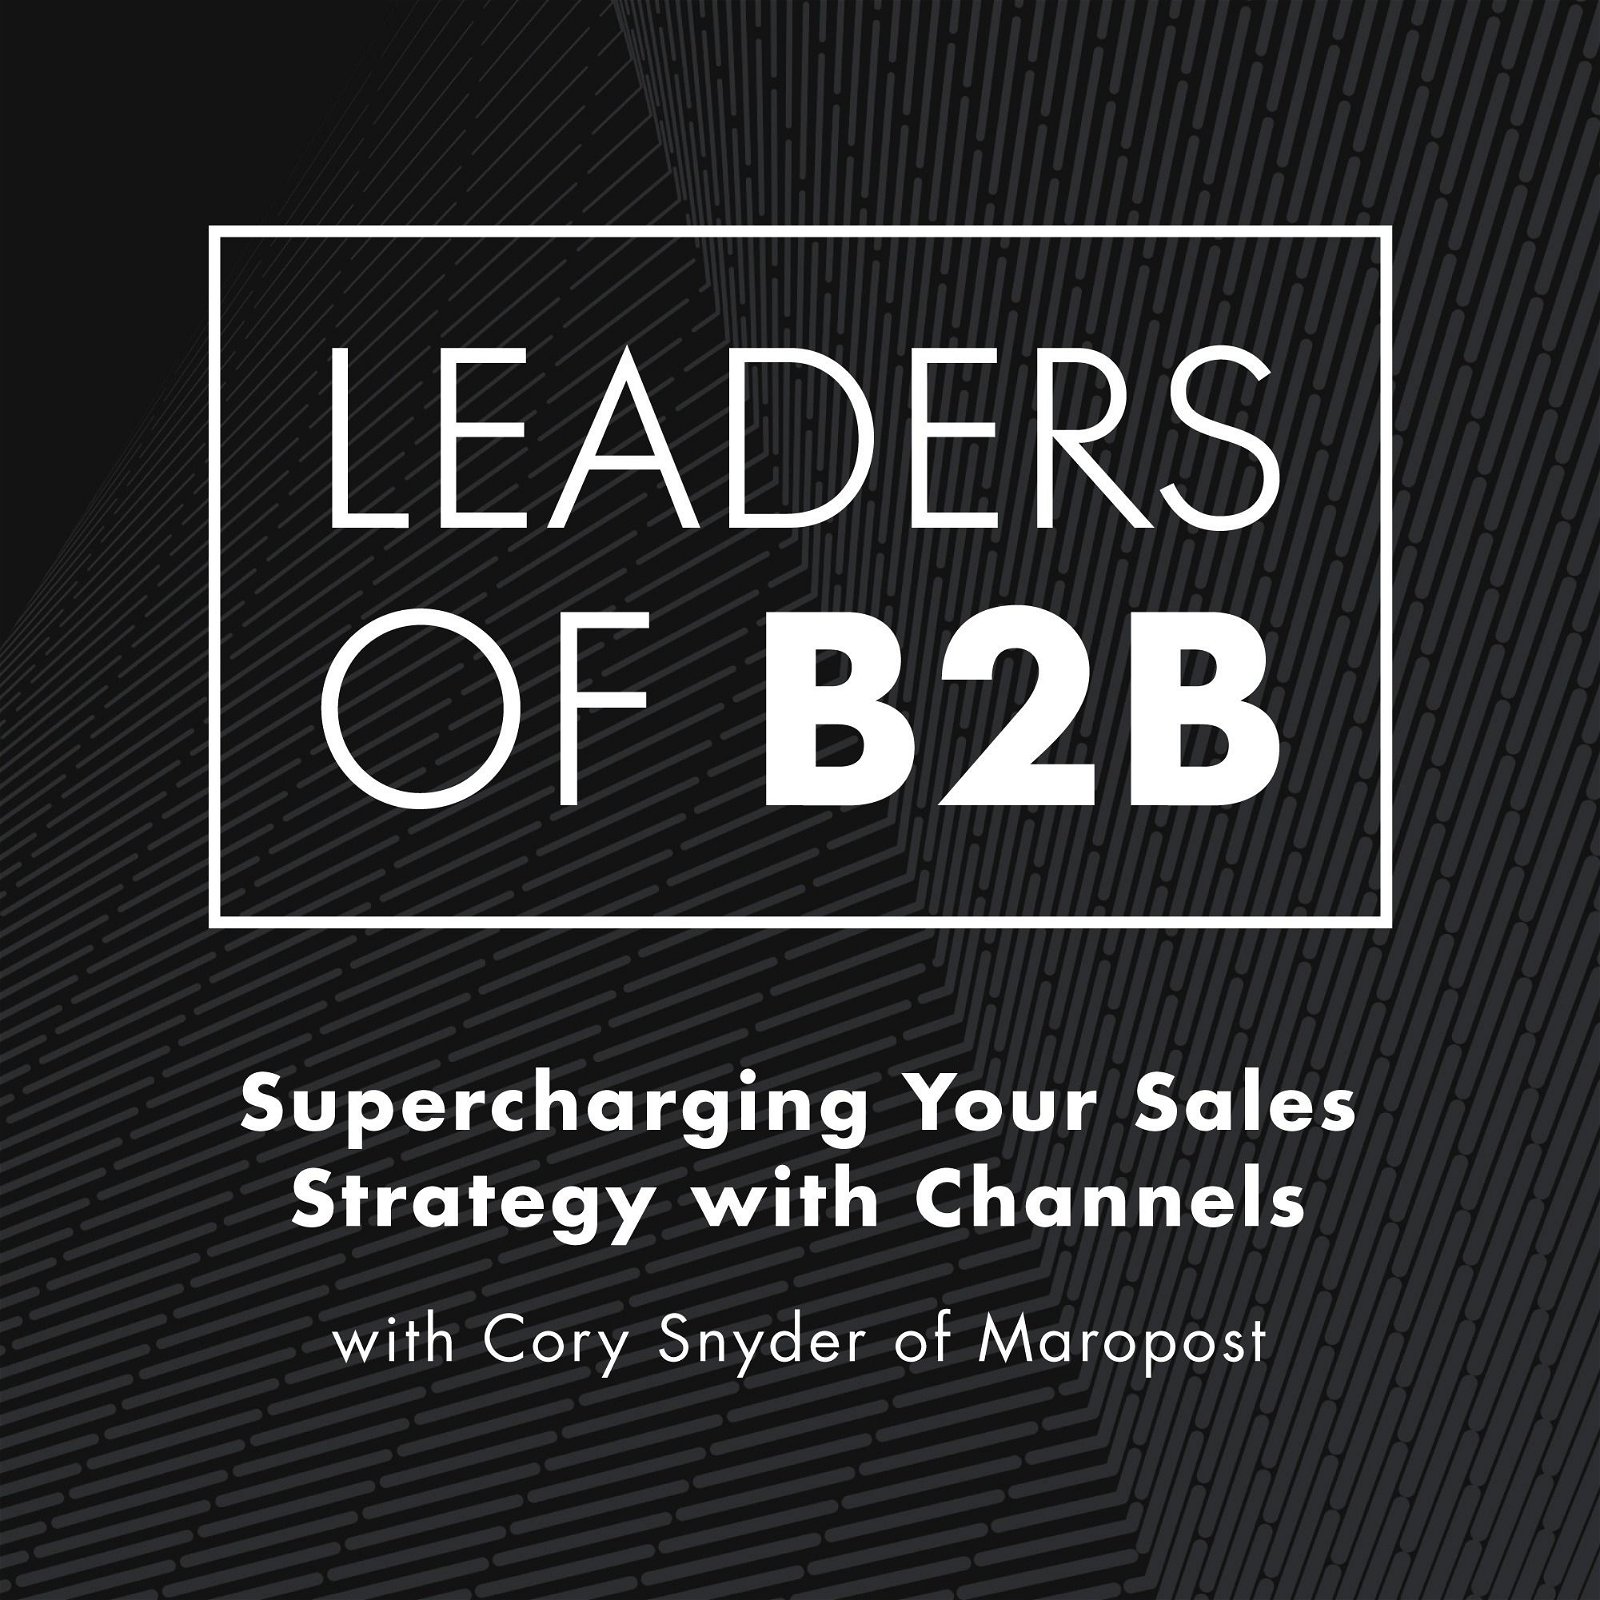 Supercharging Your Sales Strategy with Channels, with Cory Snyder of Maropost